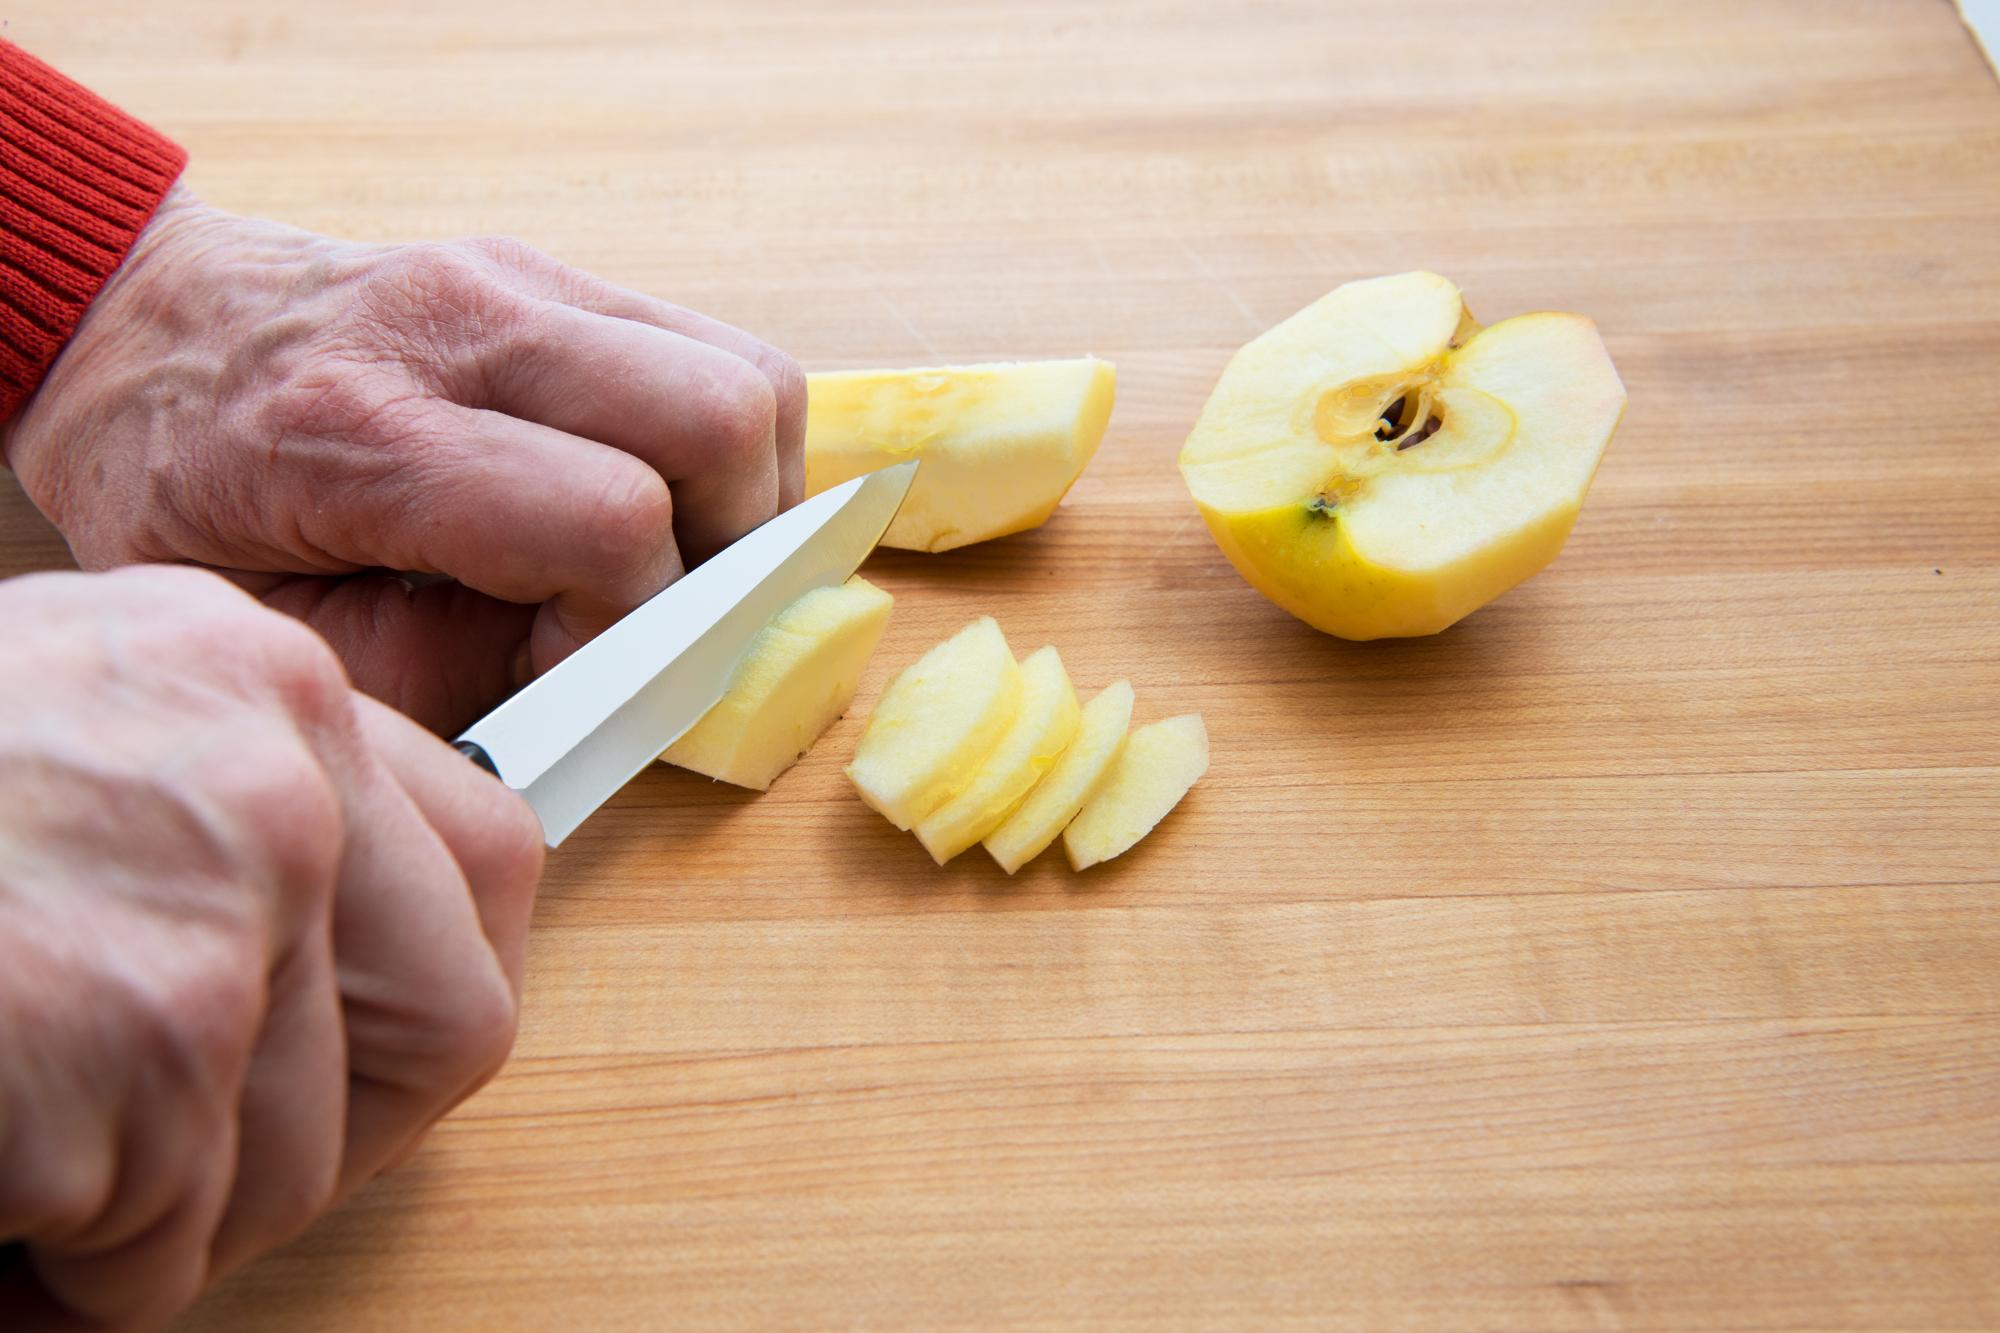 How to Slice Apples